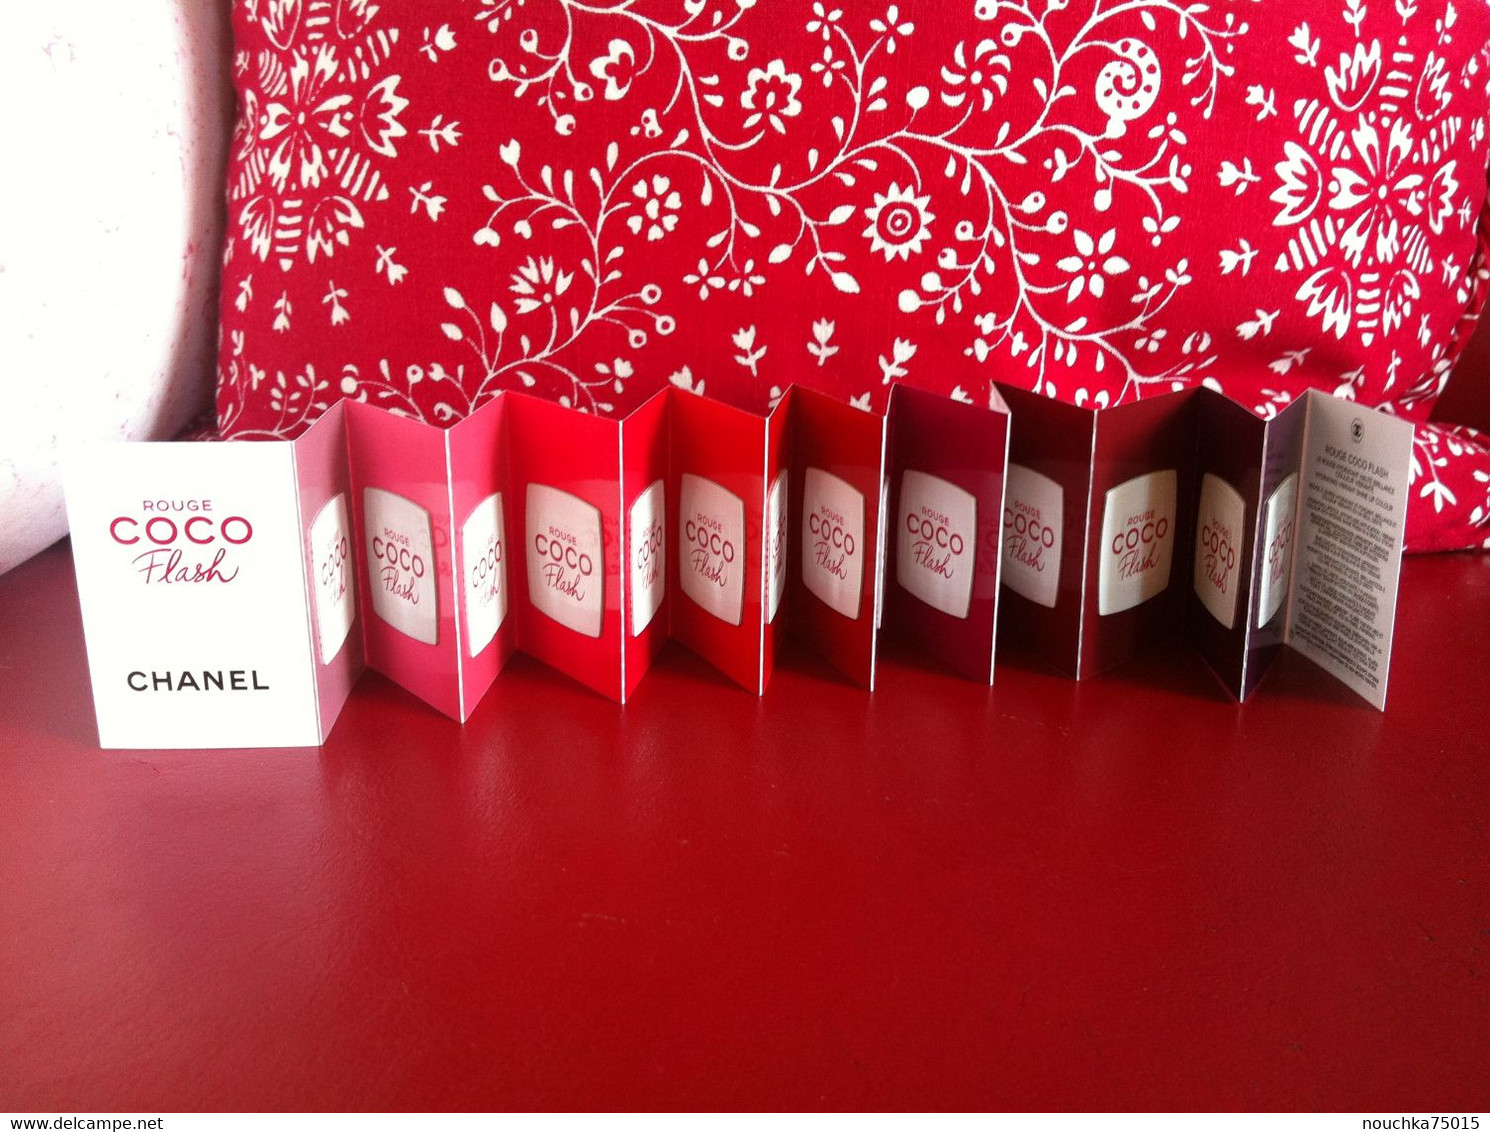 Chanel - Rouge Coco Flash, échantillons RAL - Perfume Samples (testers)